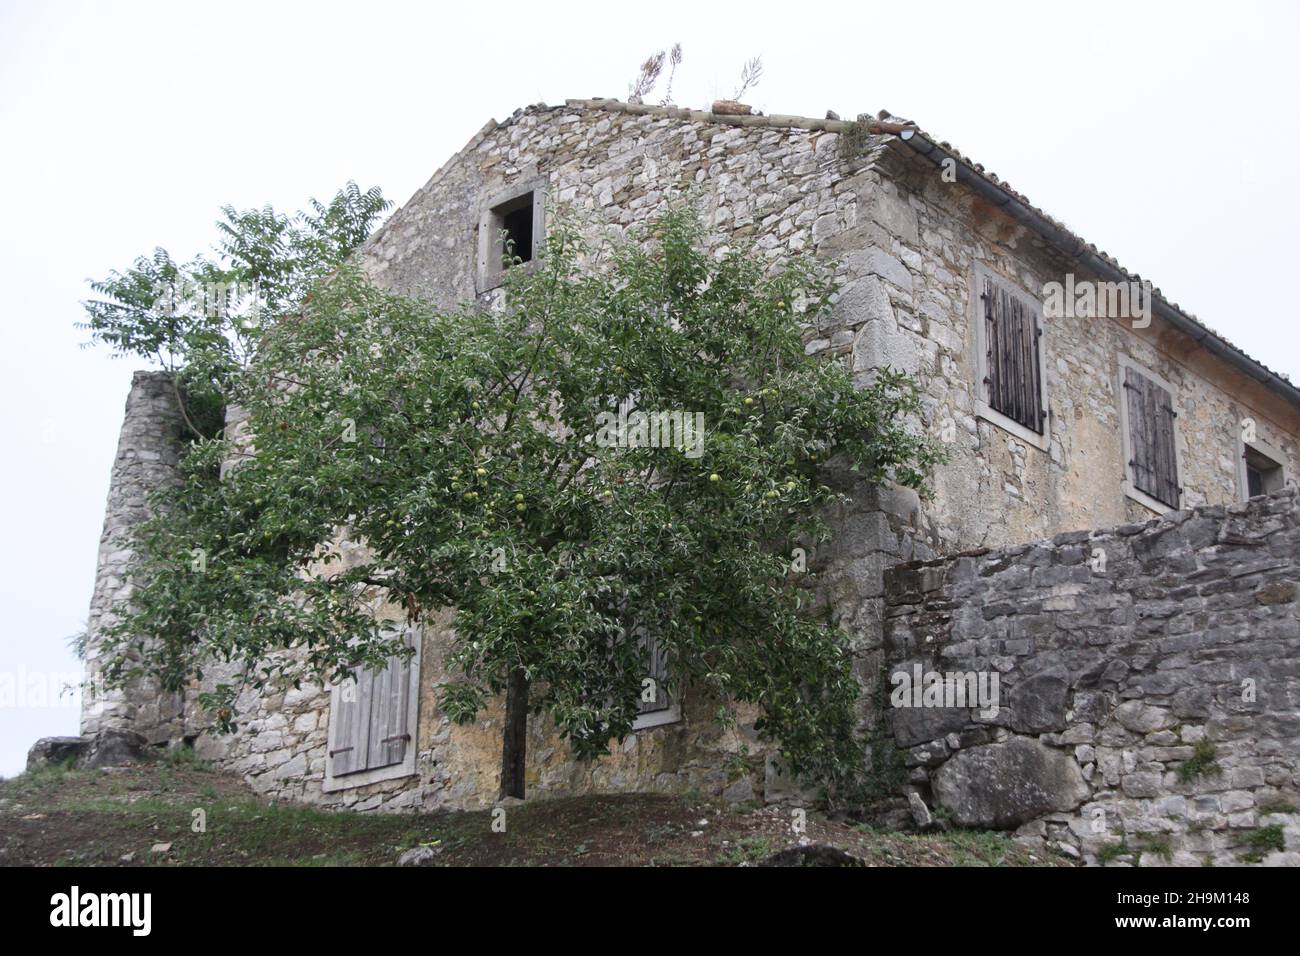 Typical old abandoned house in Croatia. Low point of view. Stock Photo